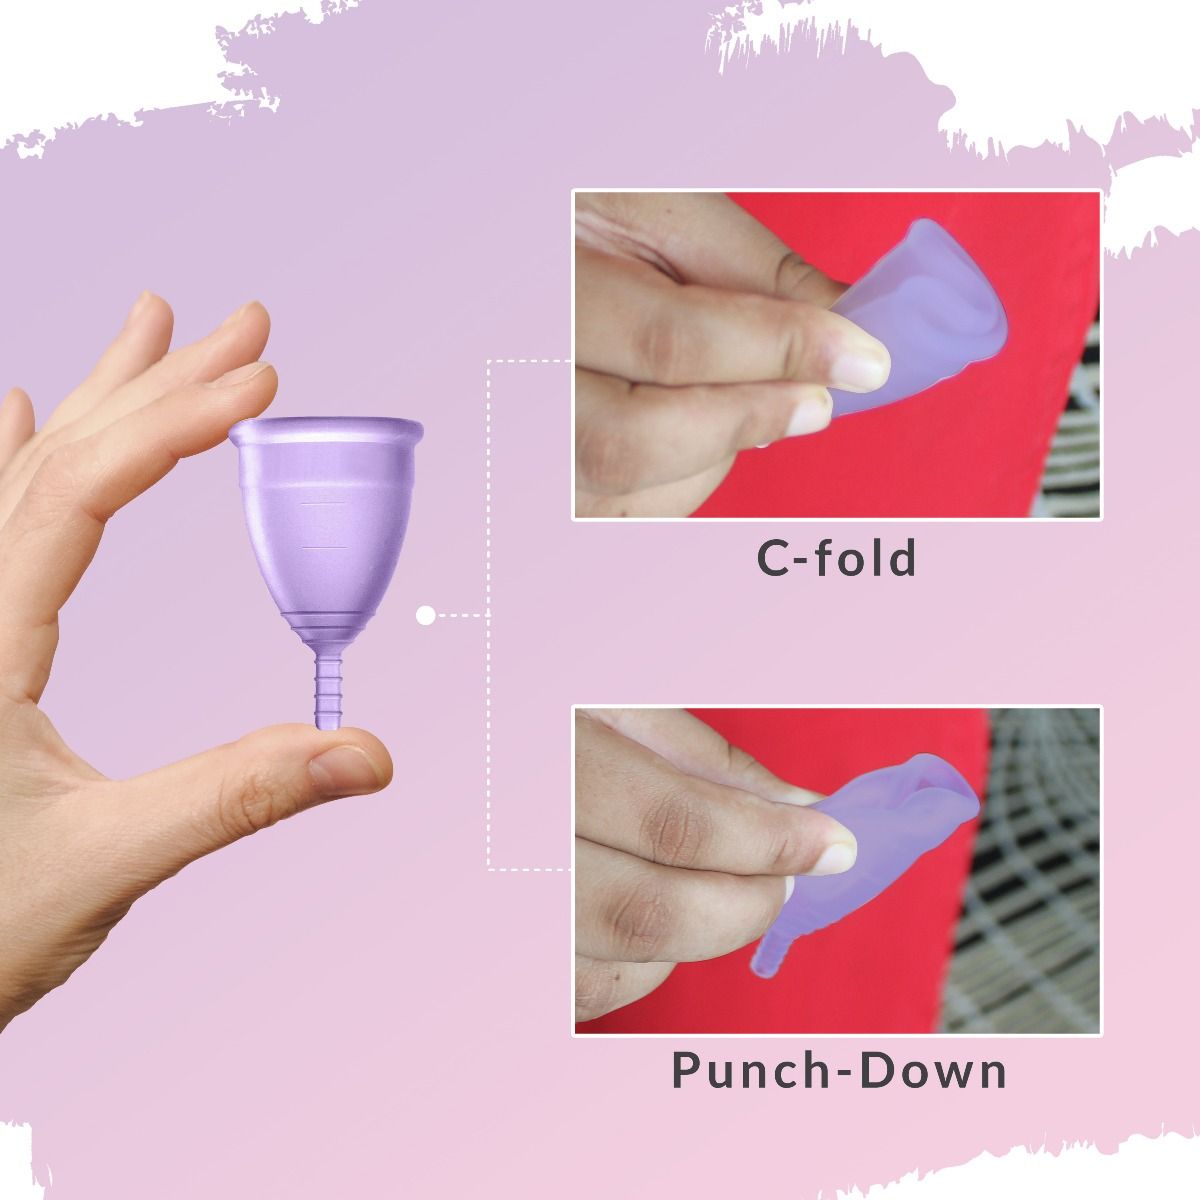 Sirona Pad-Free Periods Menstrual Cup Large, 1 Count, Pack of 1 